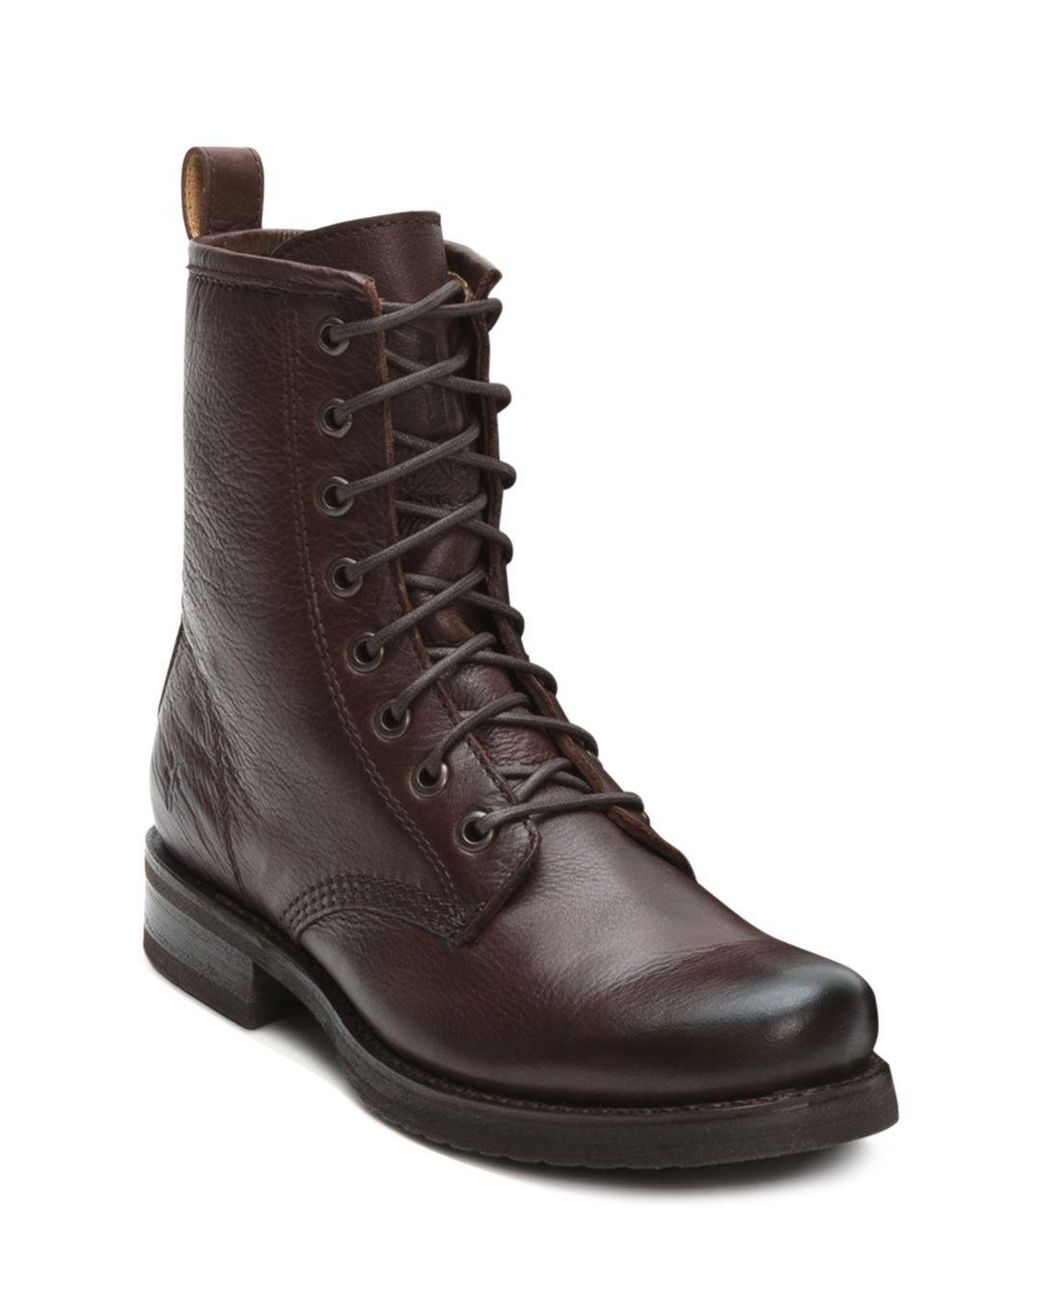 Frye Leather Veronica Lace Up Combat Boots in Dark Brown (Brown) - Lyst